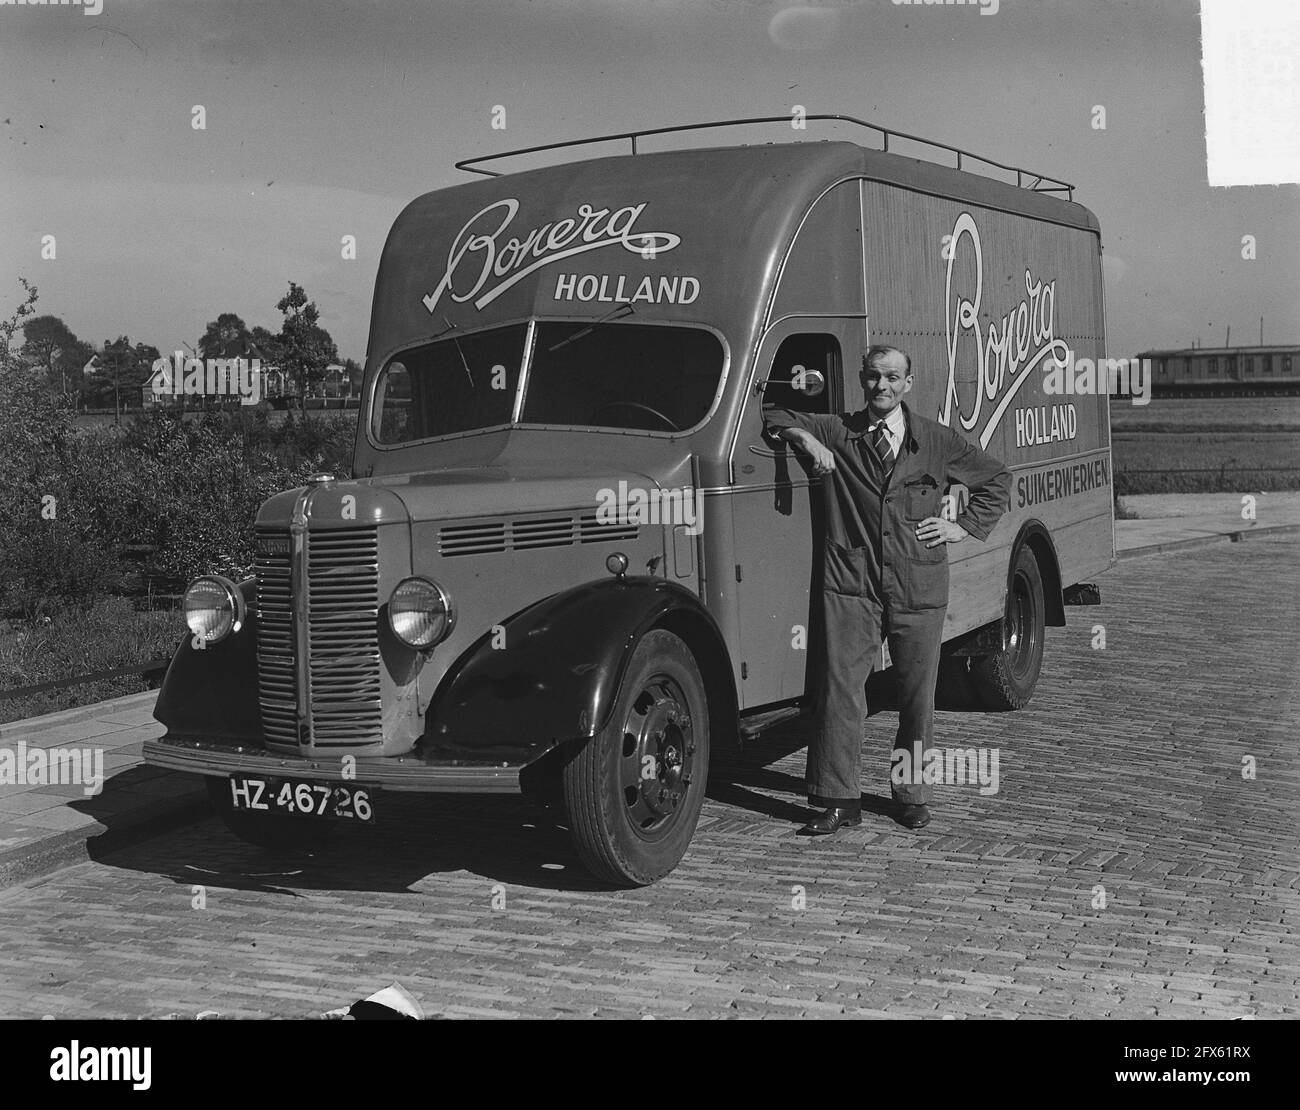 Shots truck of Chocolate and Sugar factory Bonera, May 22, 1951, trucks, The Netherlands, 20th century press agency photo, news to remember, documentary, historic photography 1945-1990, visual stories, human history of the Twentieth Century, capturing moments in time Stock Photo